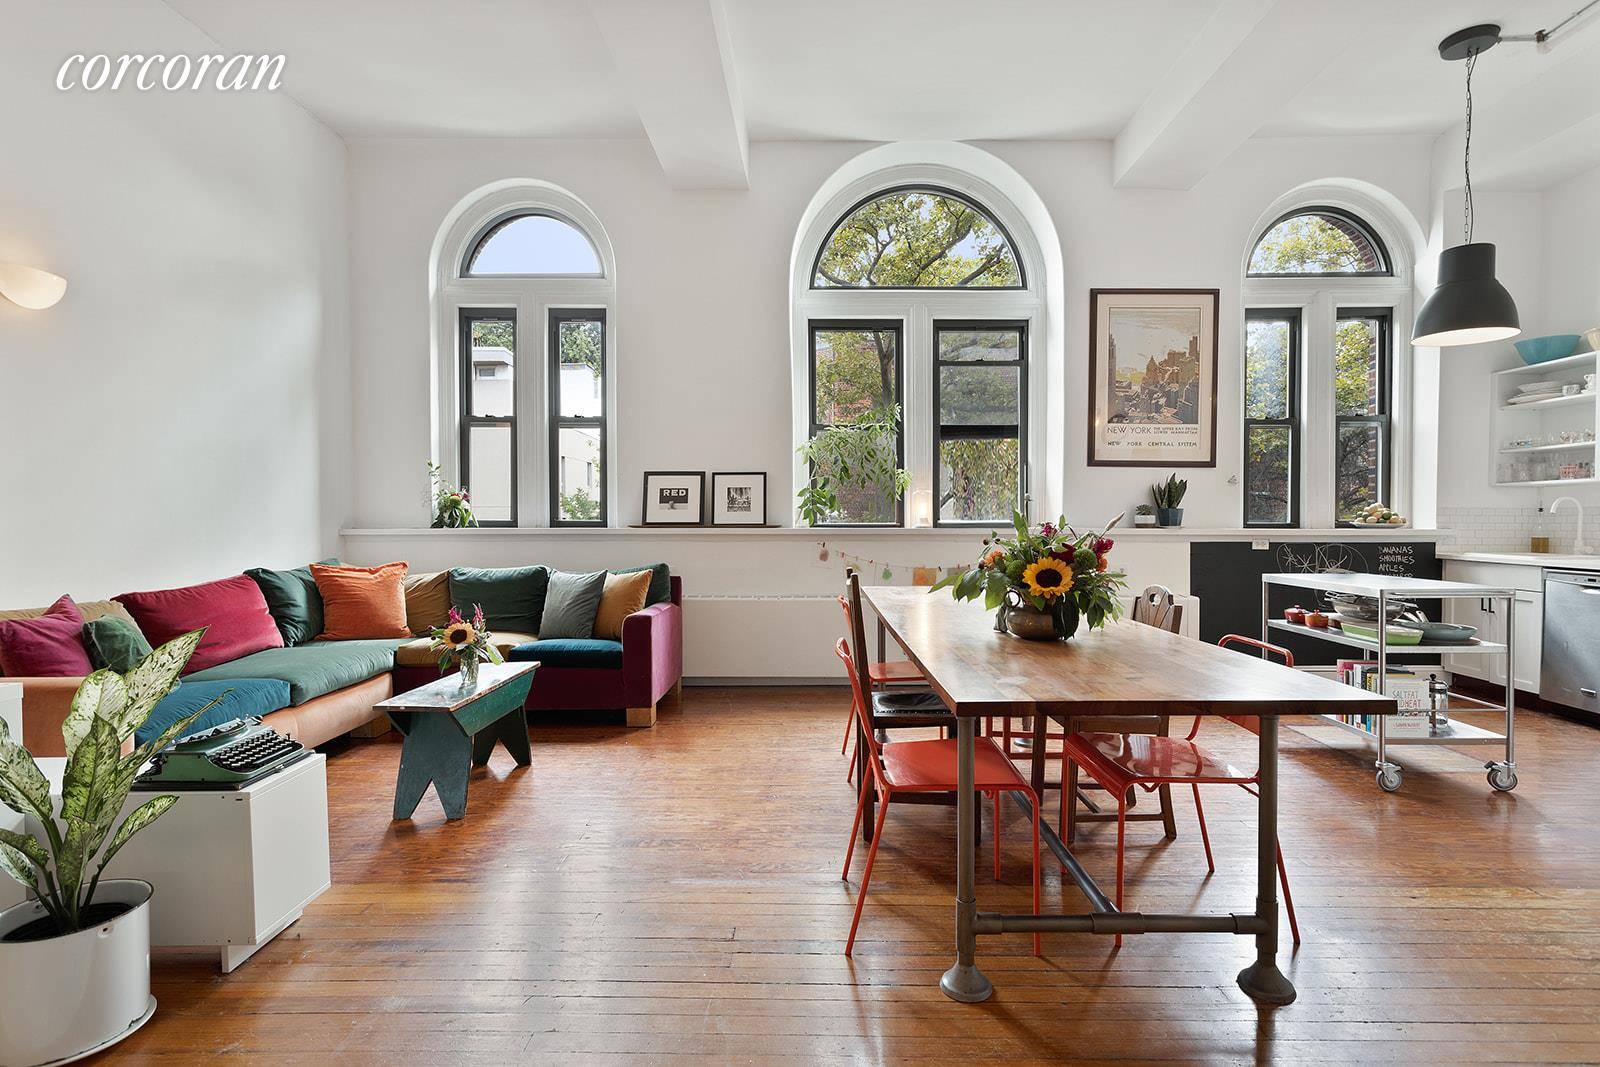 WELCOME HOME TO THE SAINT JOHN'S CONDOMINIUM a true loft in Greenwood Heights Brooklyn, thoughtfully converted from an architecturally notable schoolhouse built in 1905 of Harvard brick and terracotta.